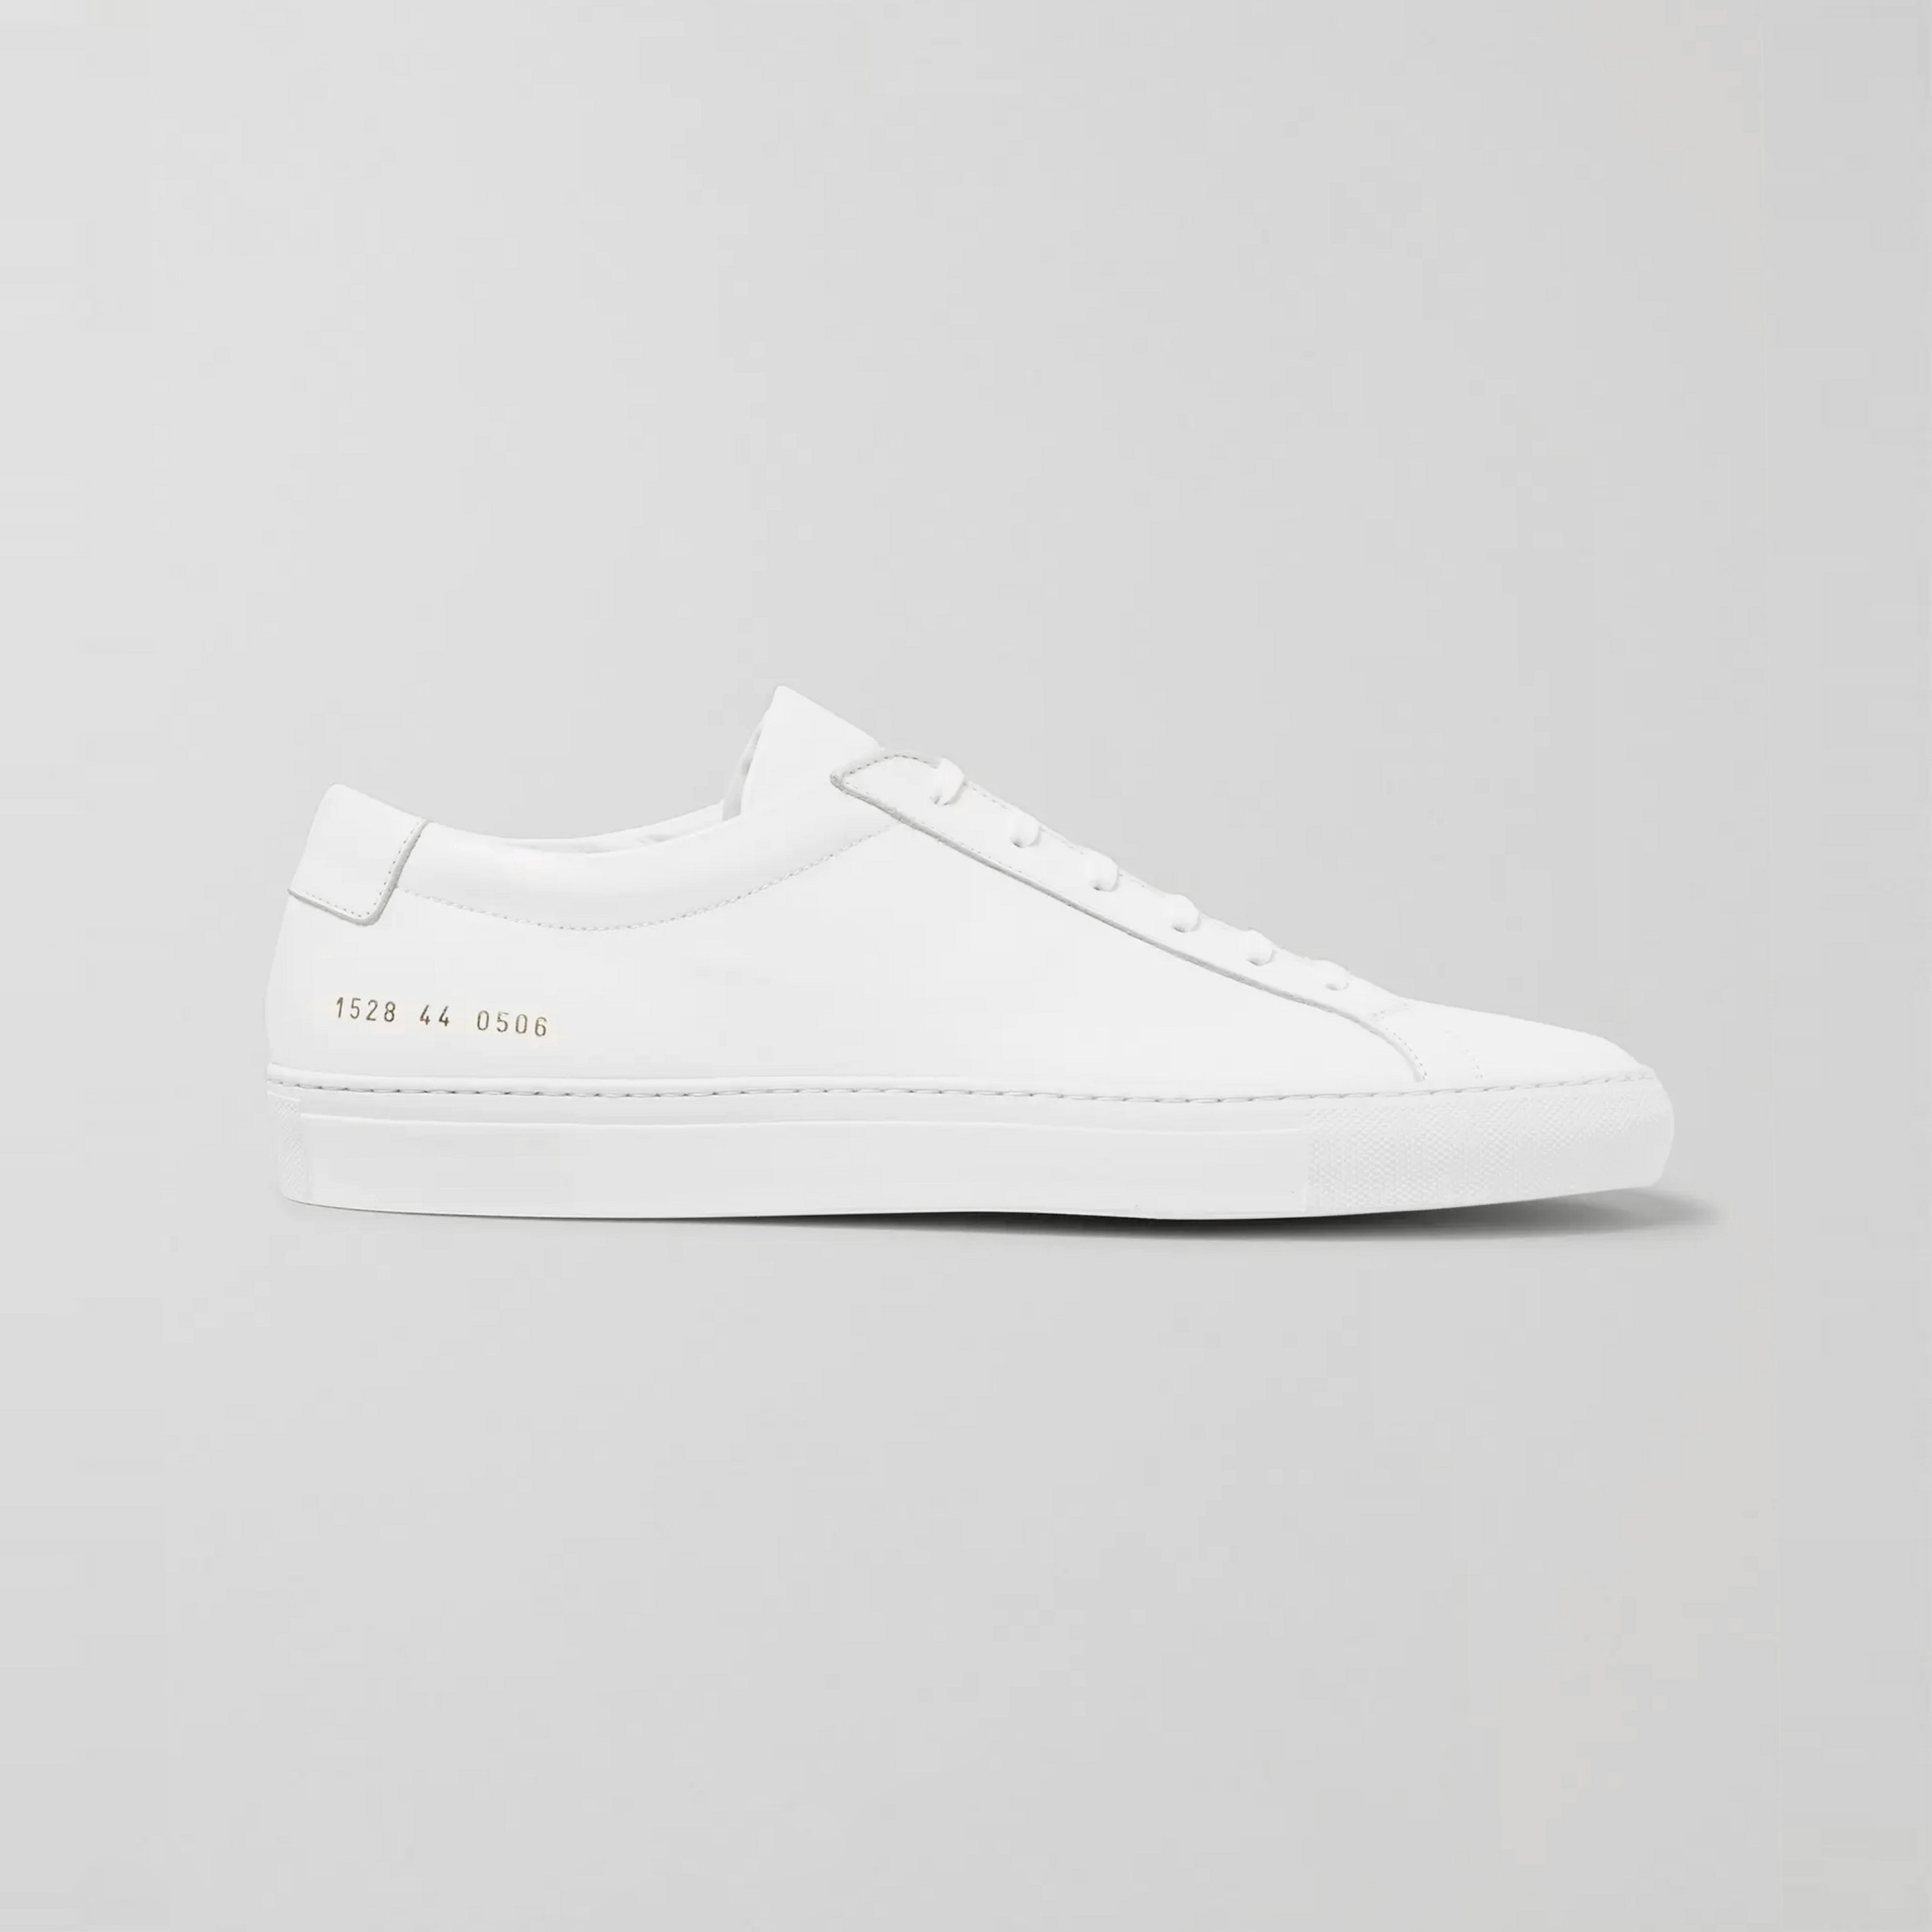 Common Projects Original Achilles | Softer Volumes